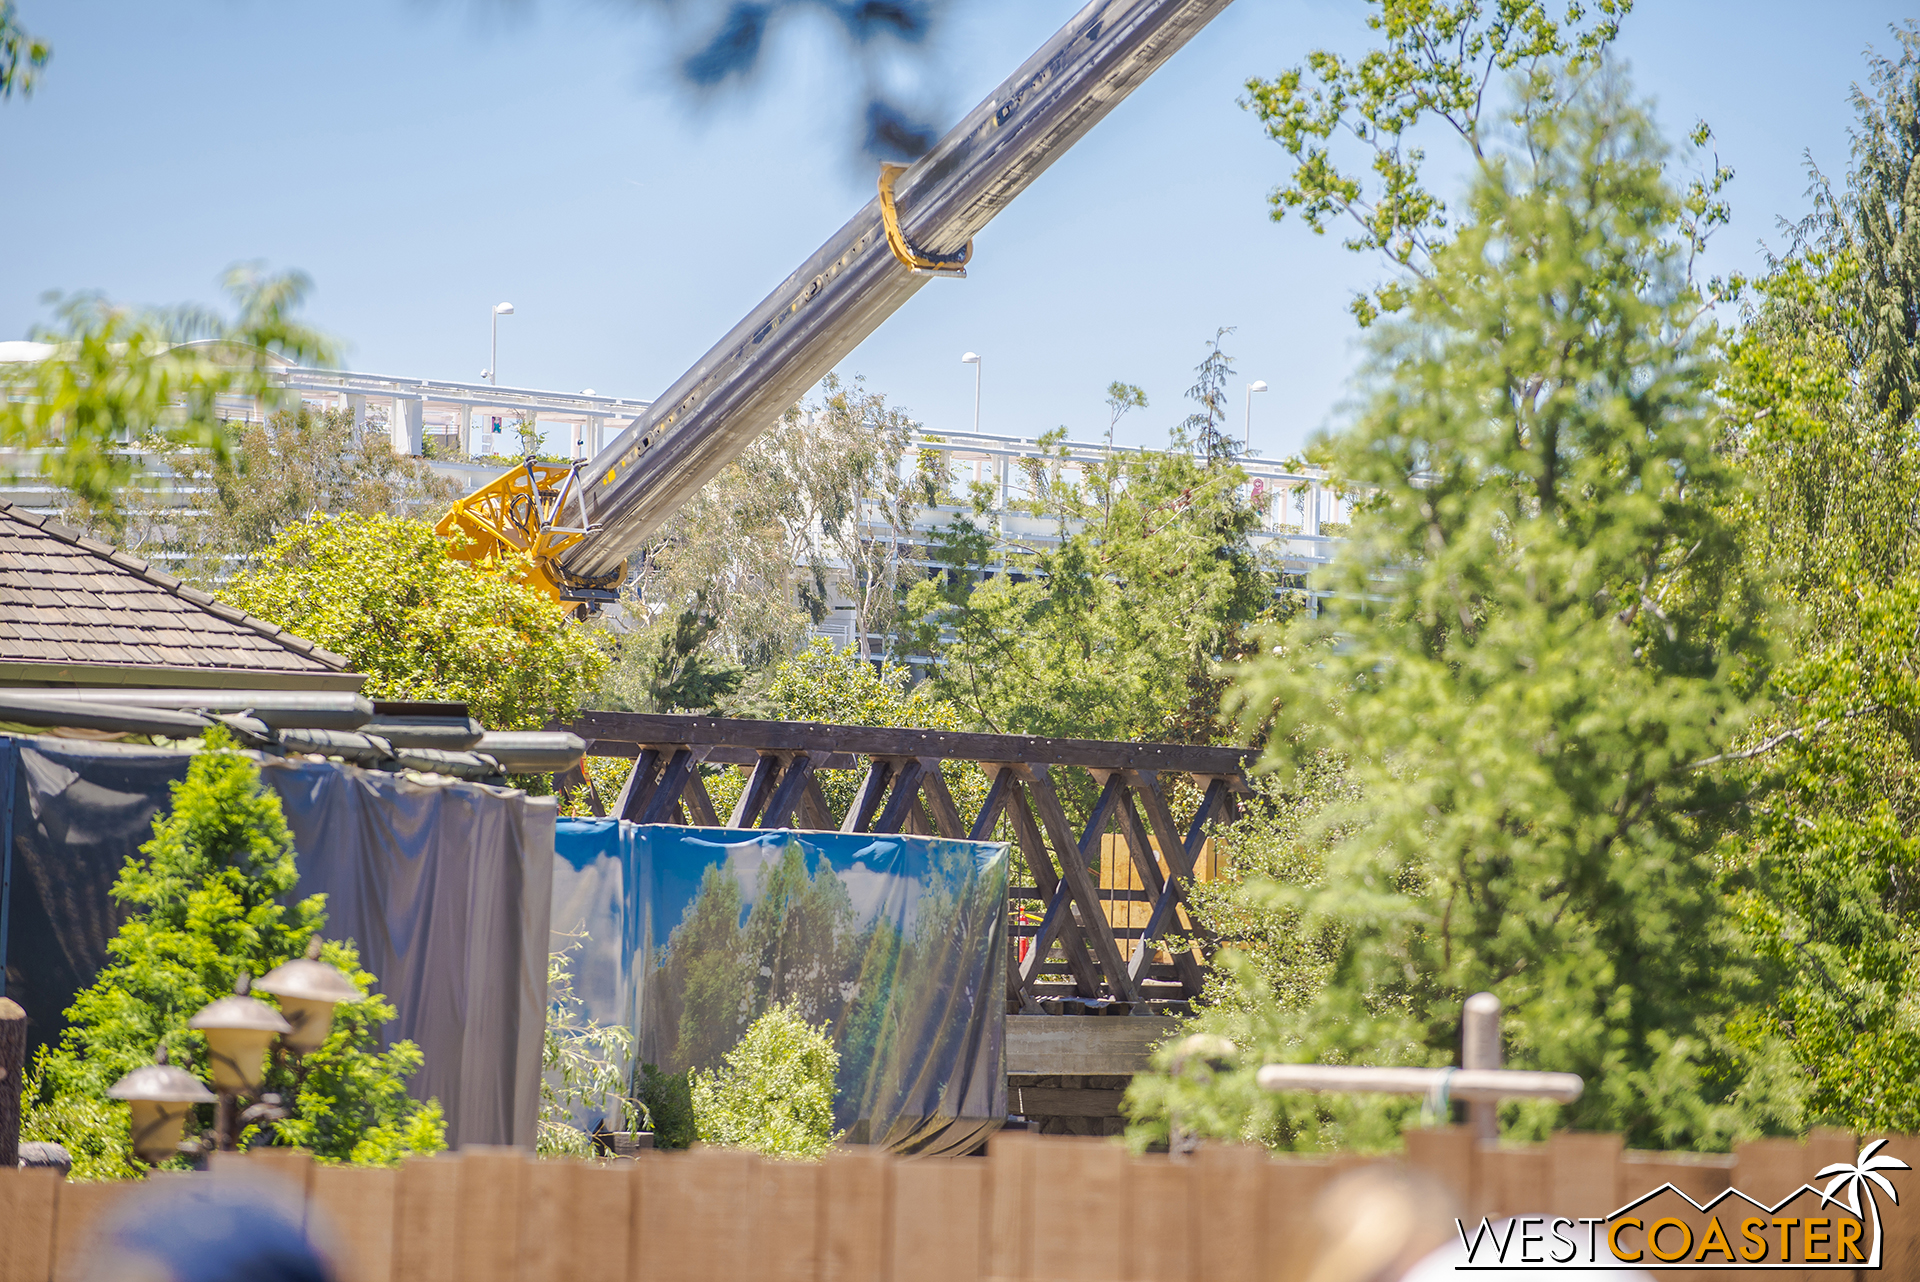  Continuing on, here's a glimpse of bridge that forms Critter Country's entrance into "Star Wars" Land. 